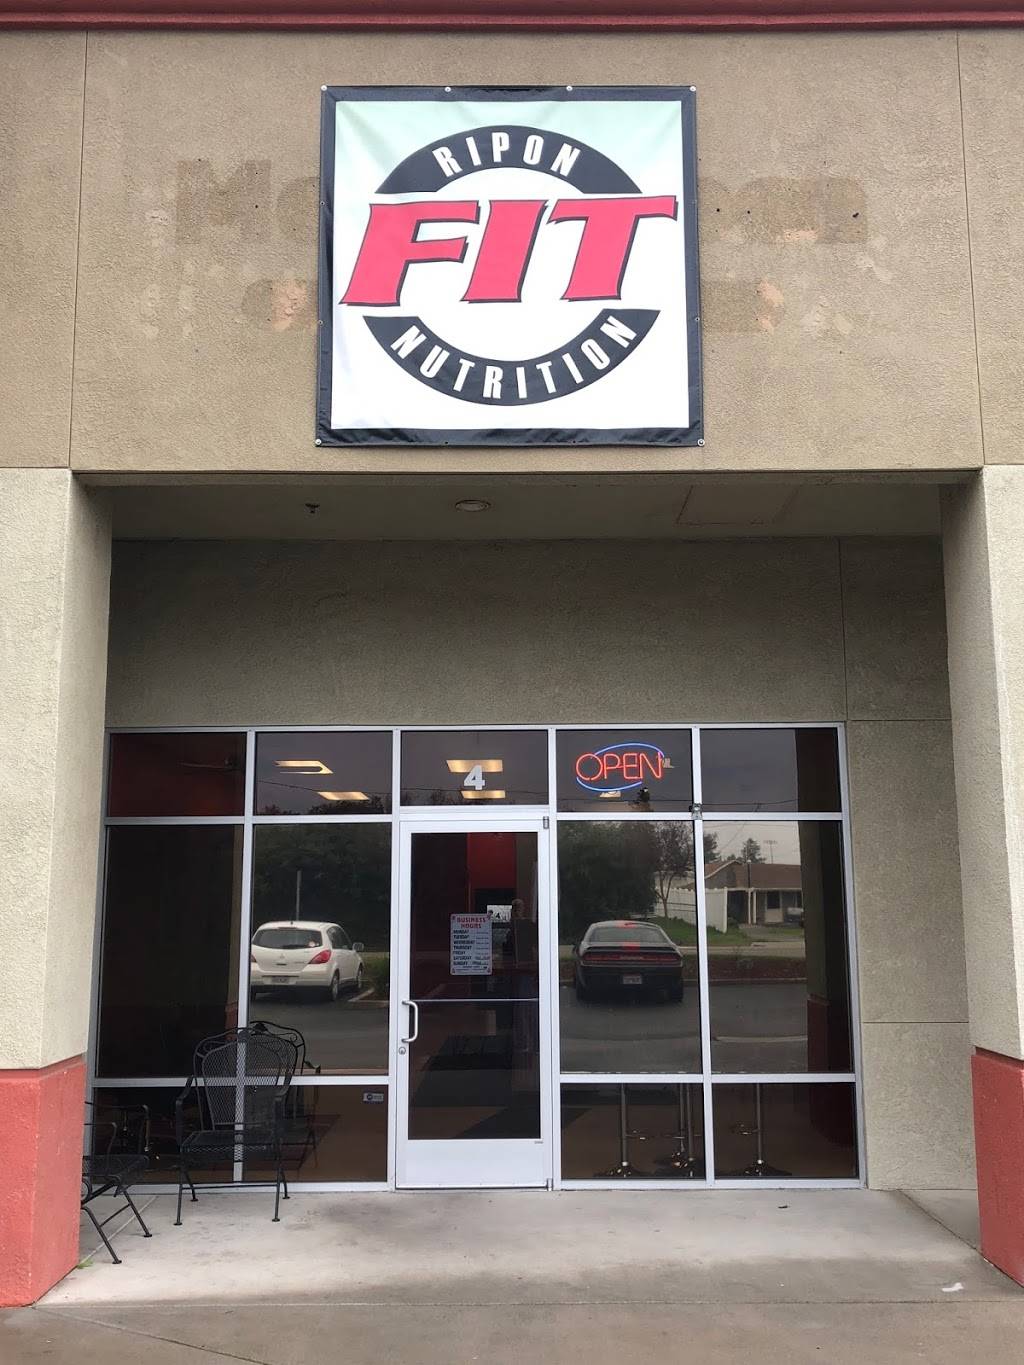 Ripon Fit Nutrition | restaurant | 467 N Wilma Ave #4, Ripon, CA 95366, USA | 2098887971 OR +1 209-888-7971